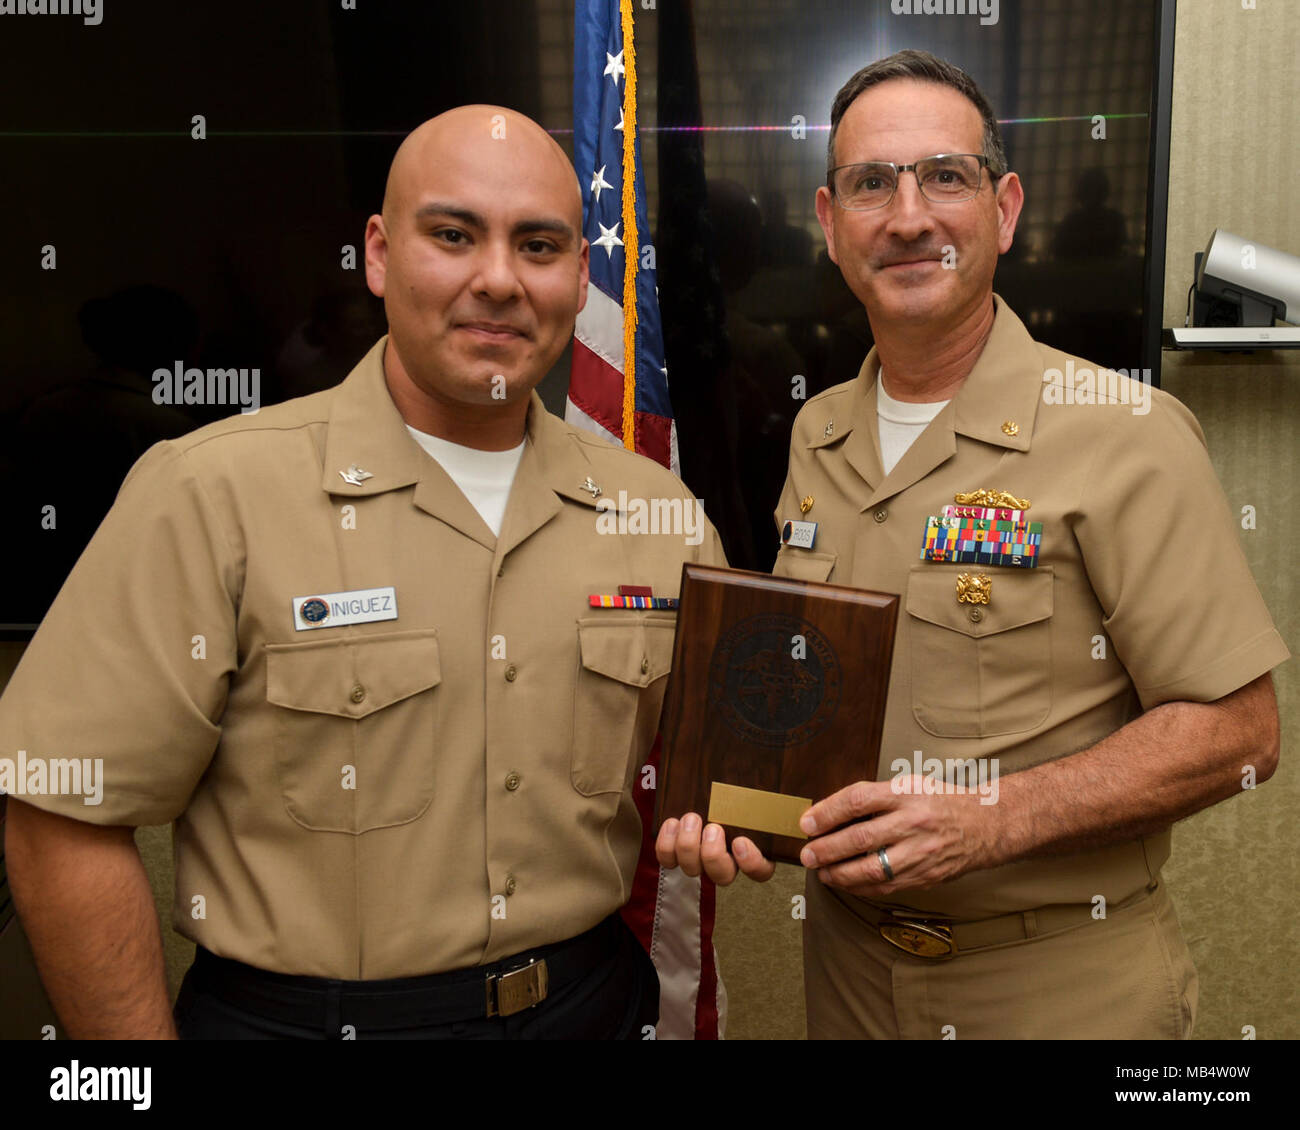 SAN DIEGO (Feb. 16, 2018) CAPT. Joel Roos, Naval Medical Center San Diego Commanding Officer,  presents Hospital Corpsman 3rd Class Class Armando Iniguez with the Junior Sailor of the Quarter award. Hospital Corpsman 3rd Class Iniguez received the award for his exceptional work and devotion to duty. Stock Photo